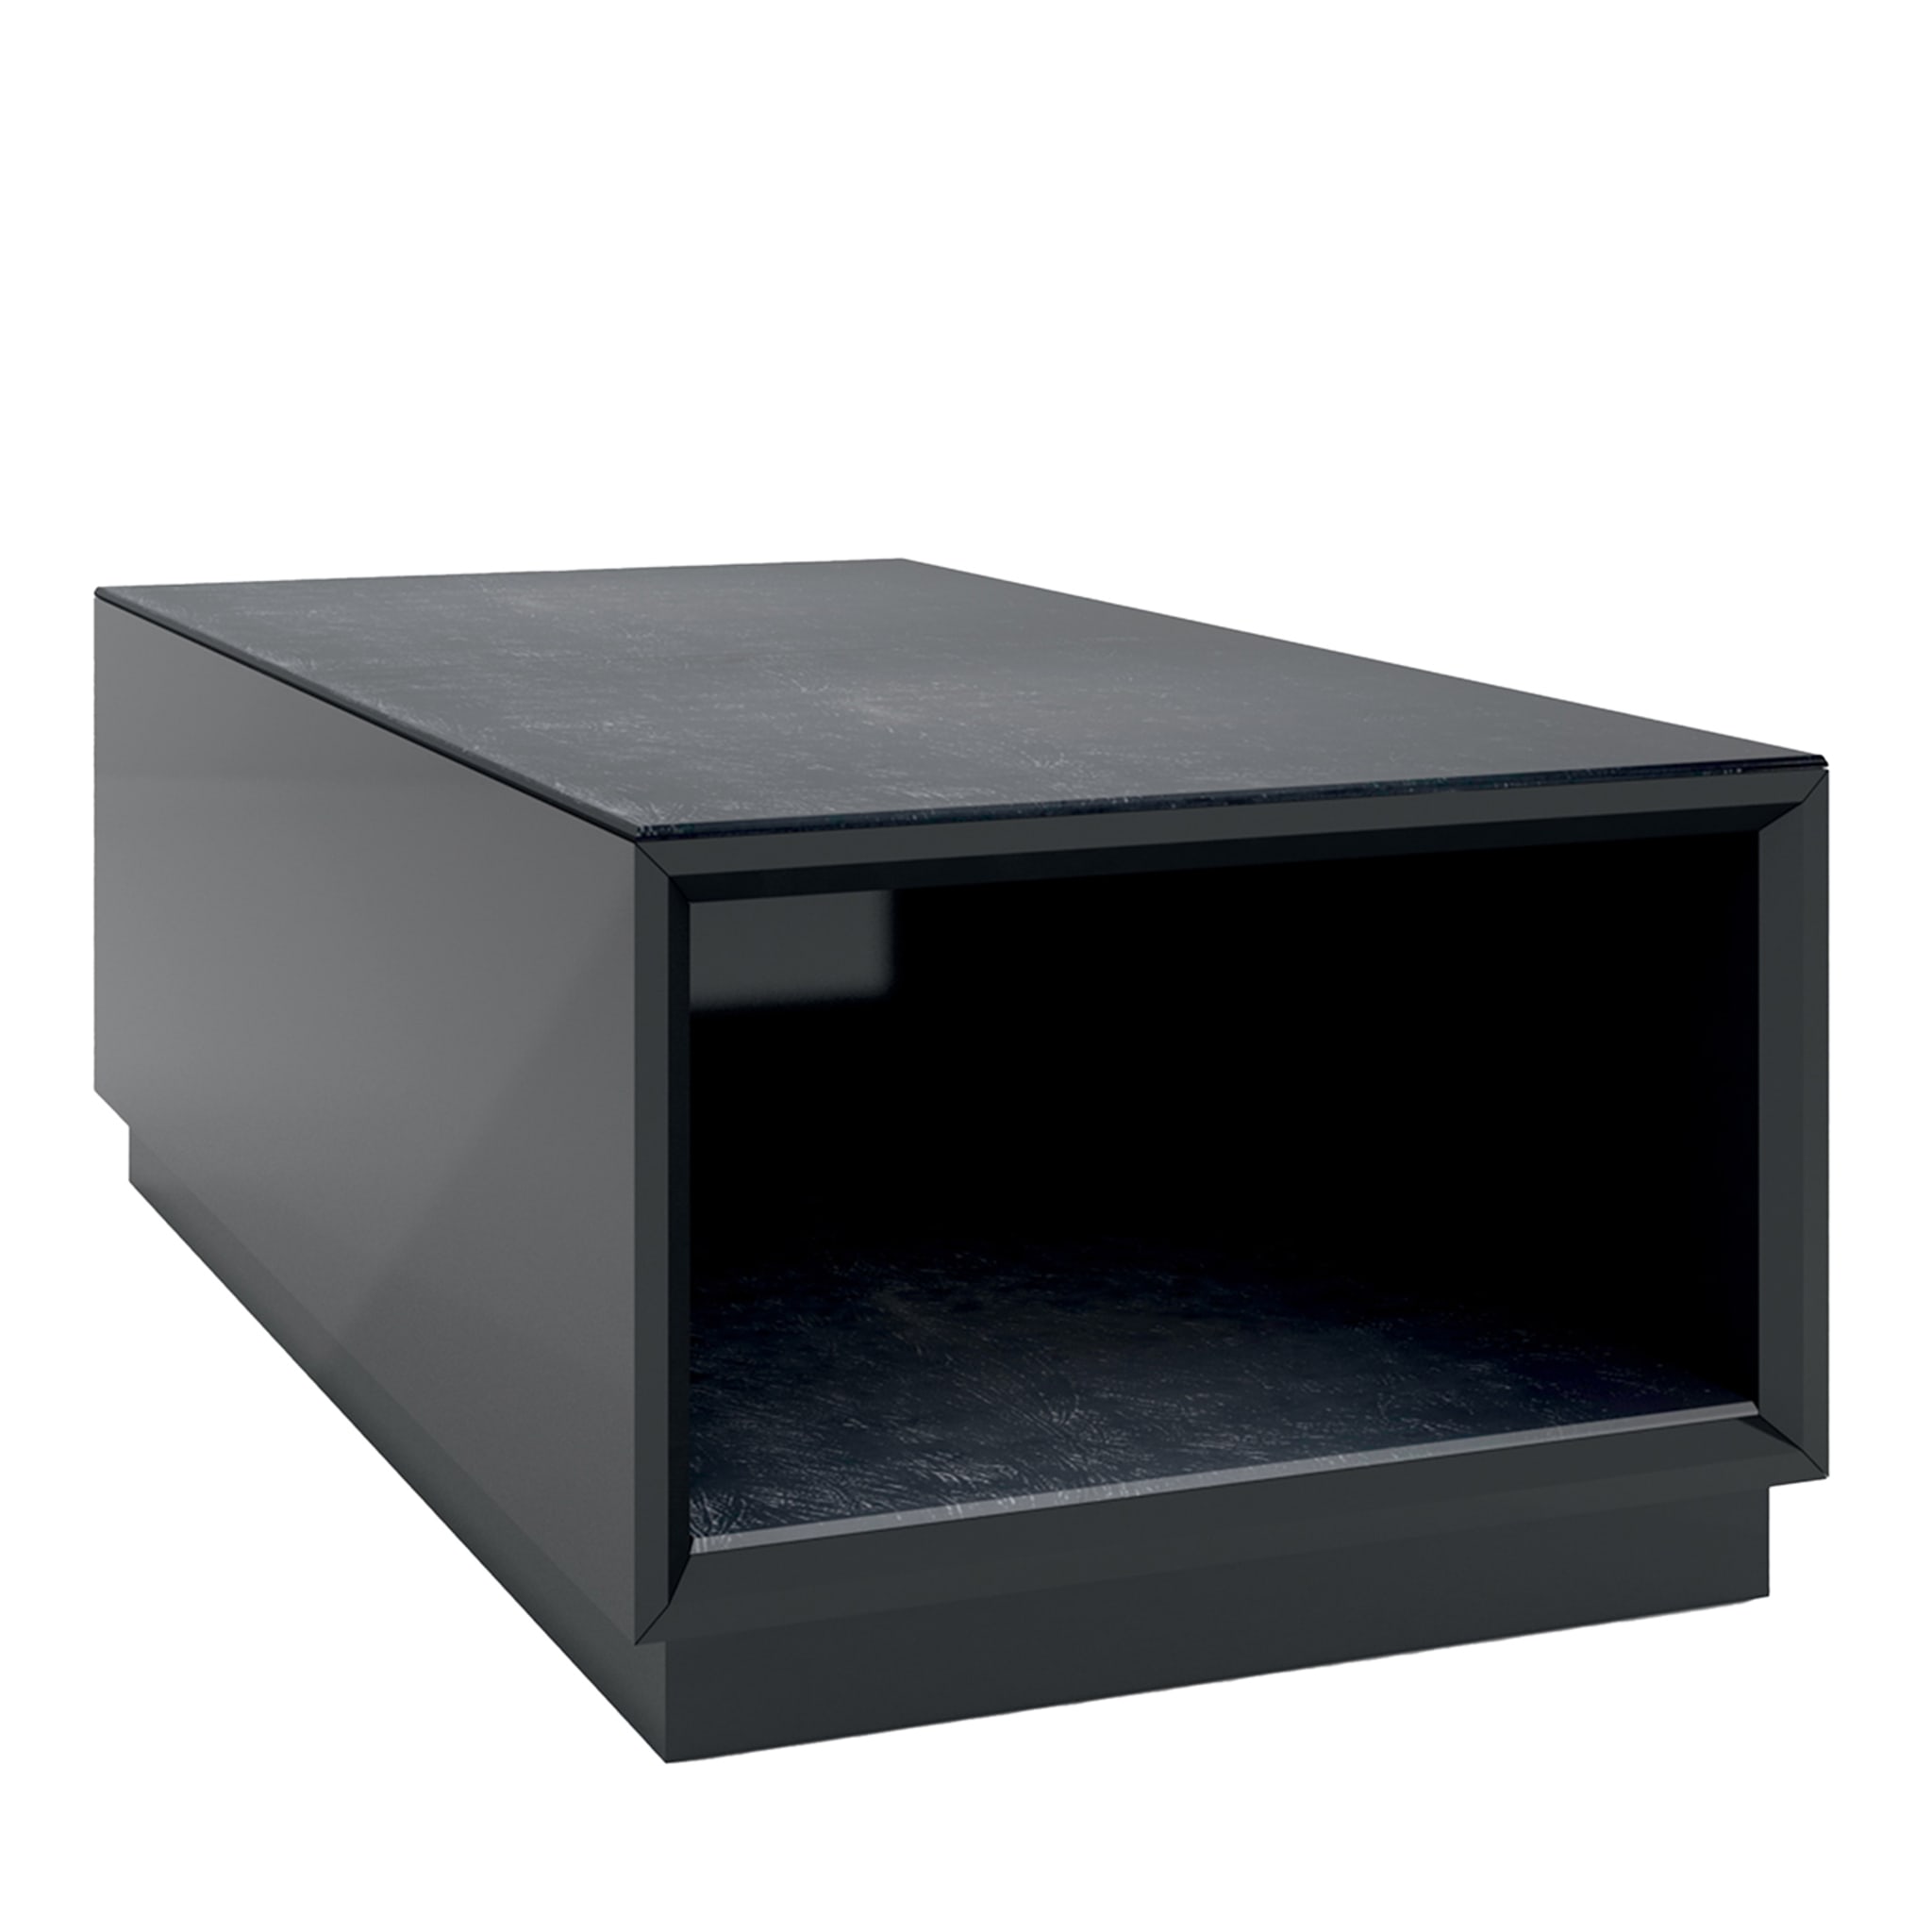 Jolly coffee table  - Black - Main view